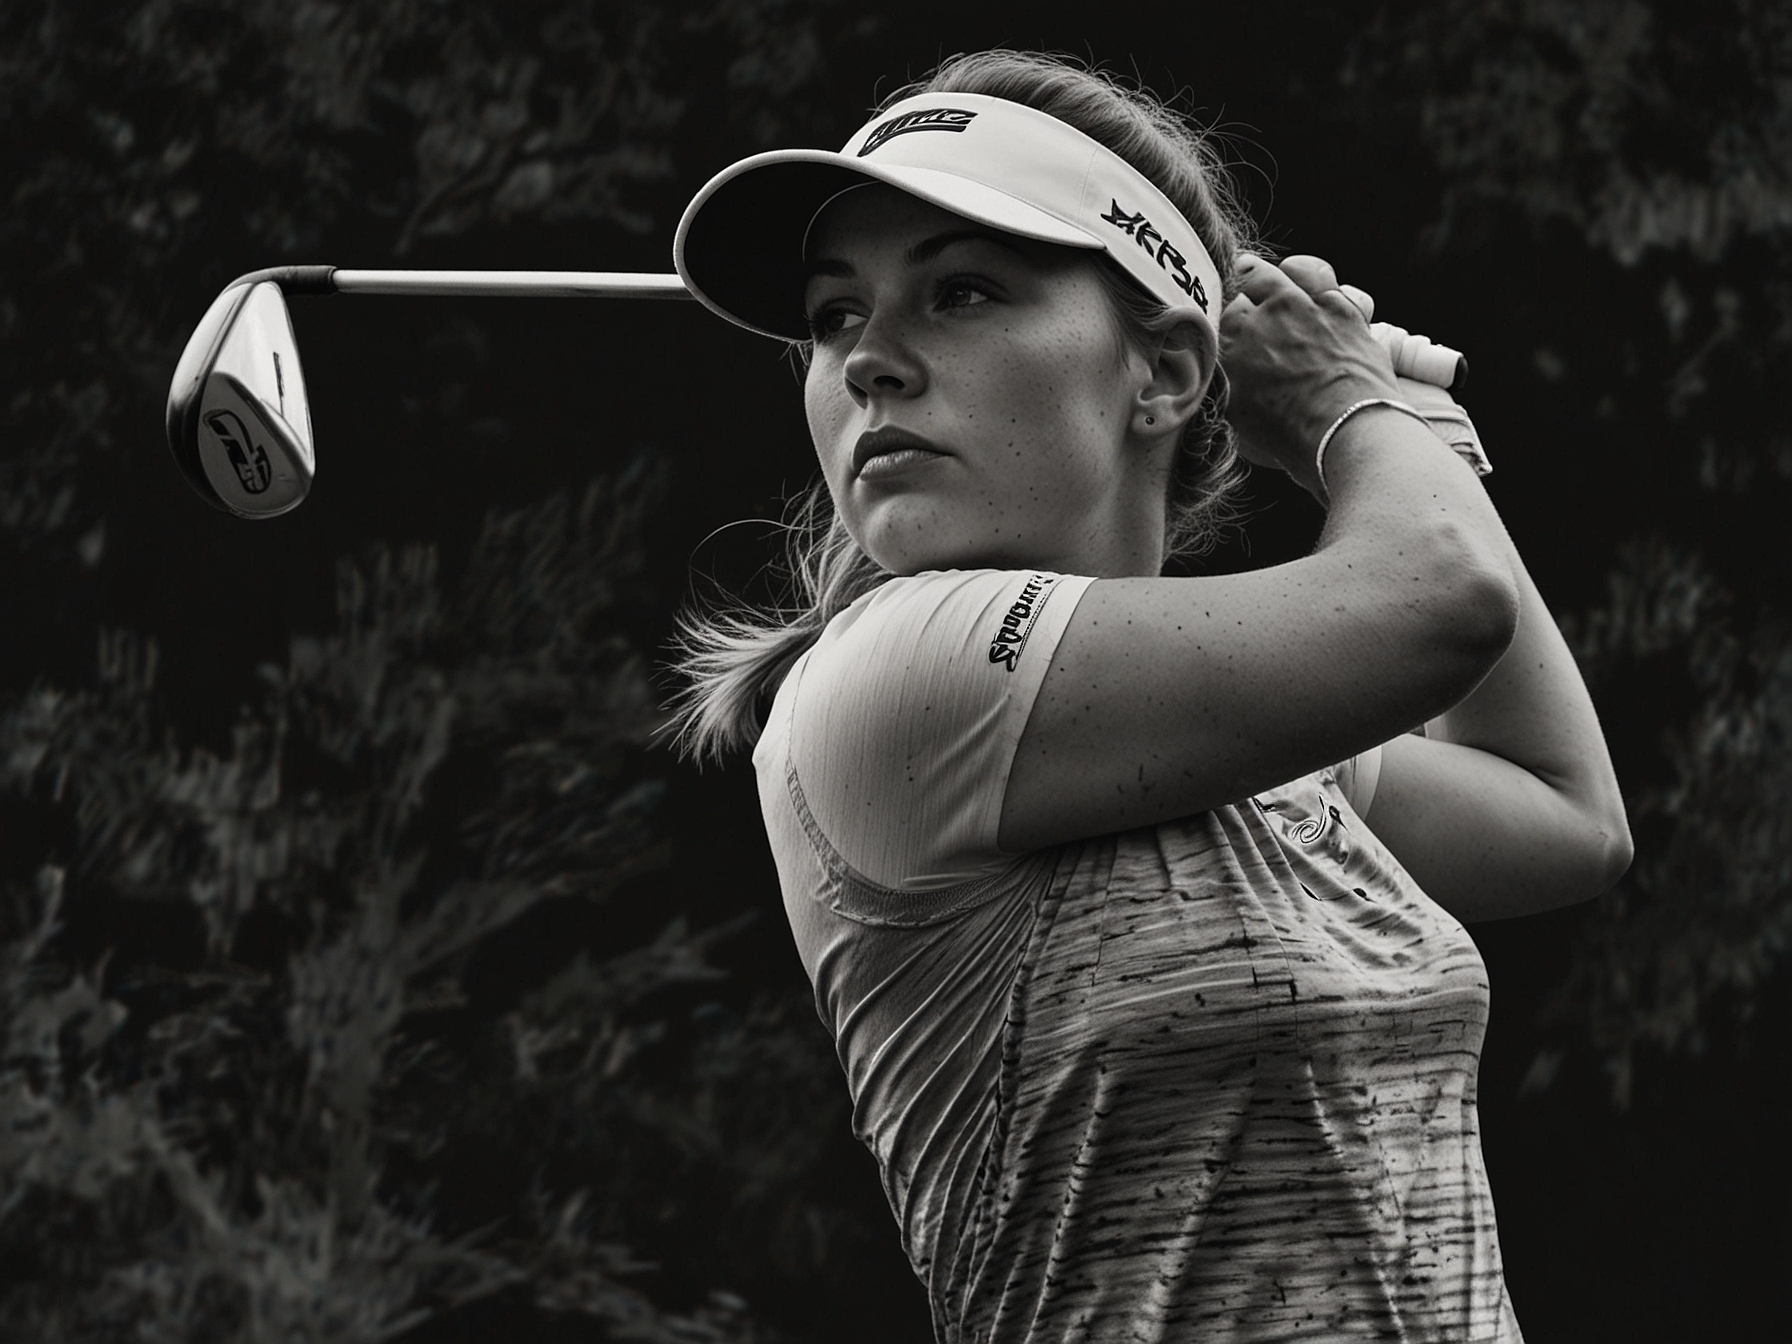 Sarah Schmelzel tees off during the KPMG Women’s PGA Championship, showcasing her impressive form and focus that contributed to her 5-under 67 and current two-shot lead in the event.